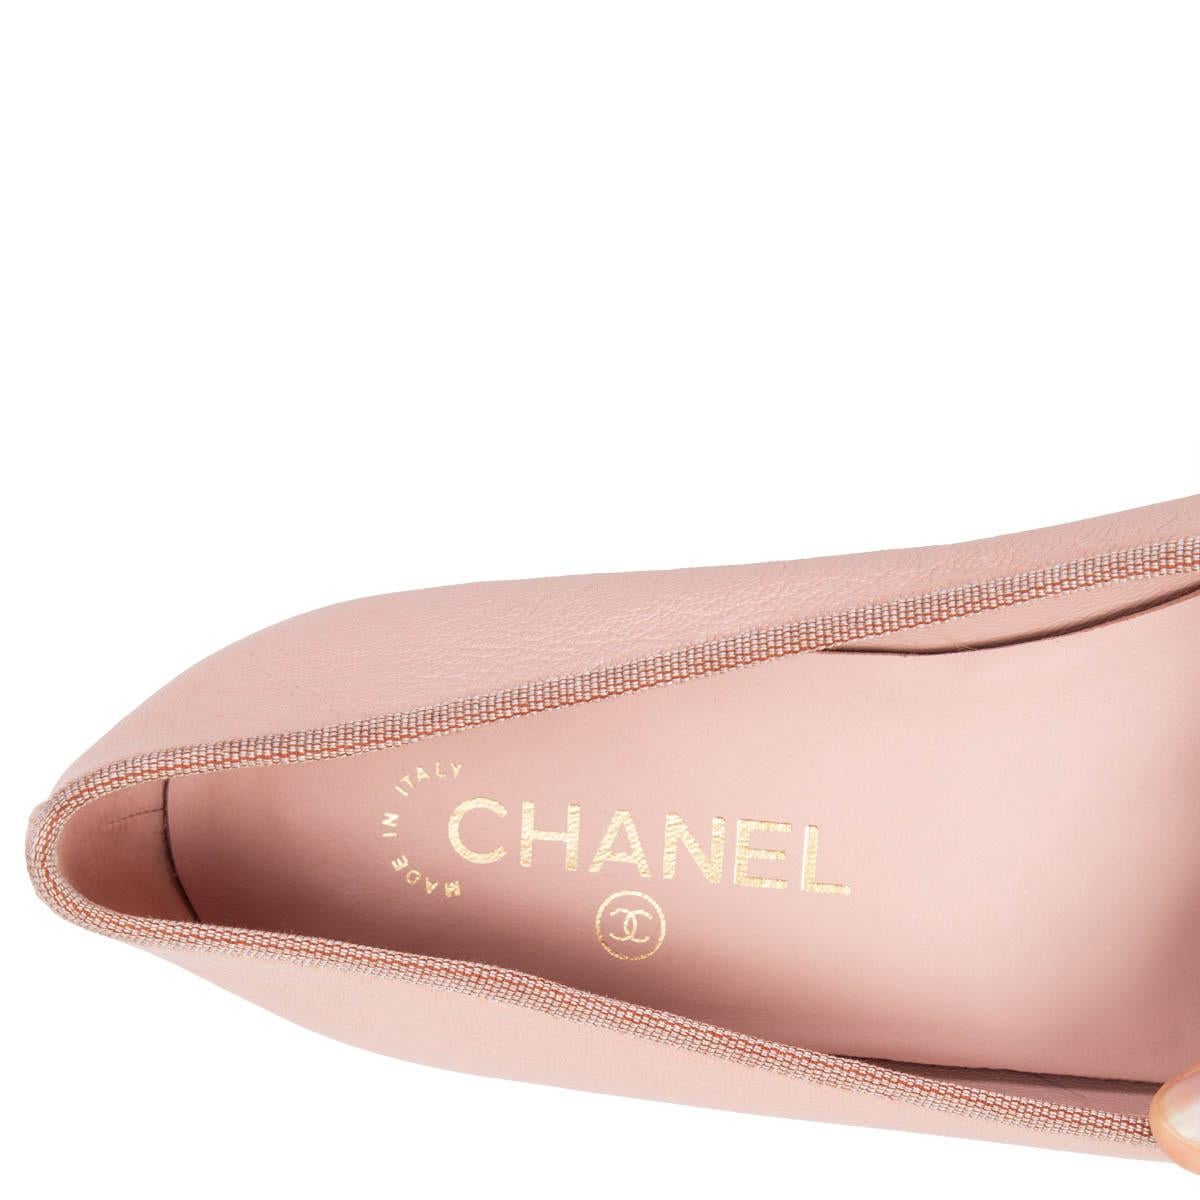 Women's CHANEL pink leather CLASSIC Ballet Flats Shoes 38.5